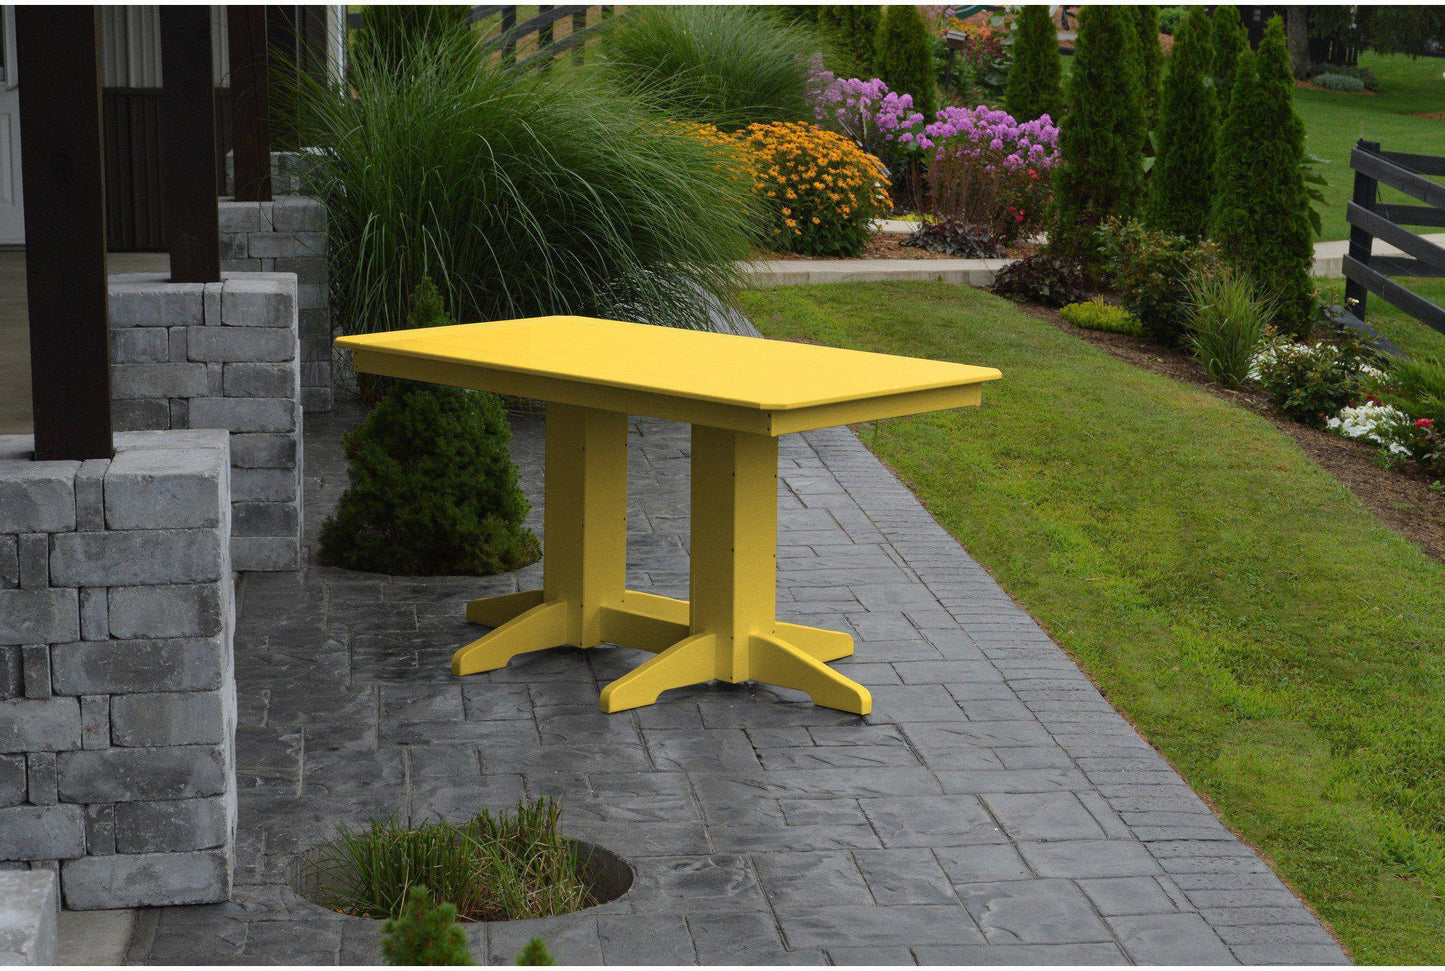 A&L Furniture Company Recycled Plastic 5' Dining Table - Lemon Yellow